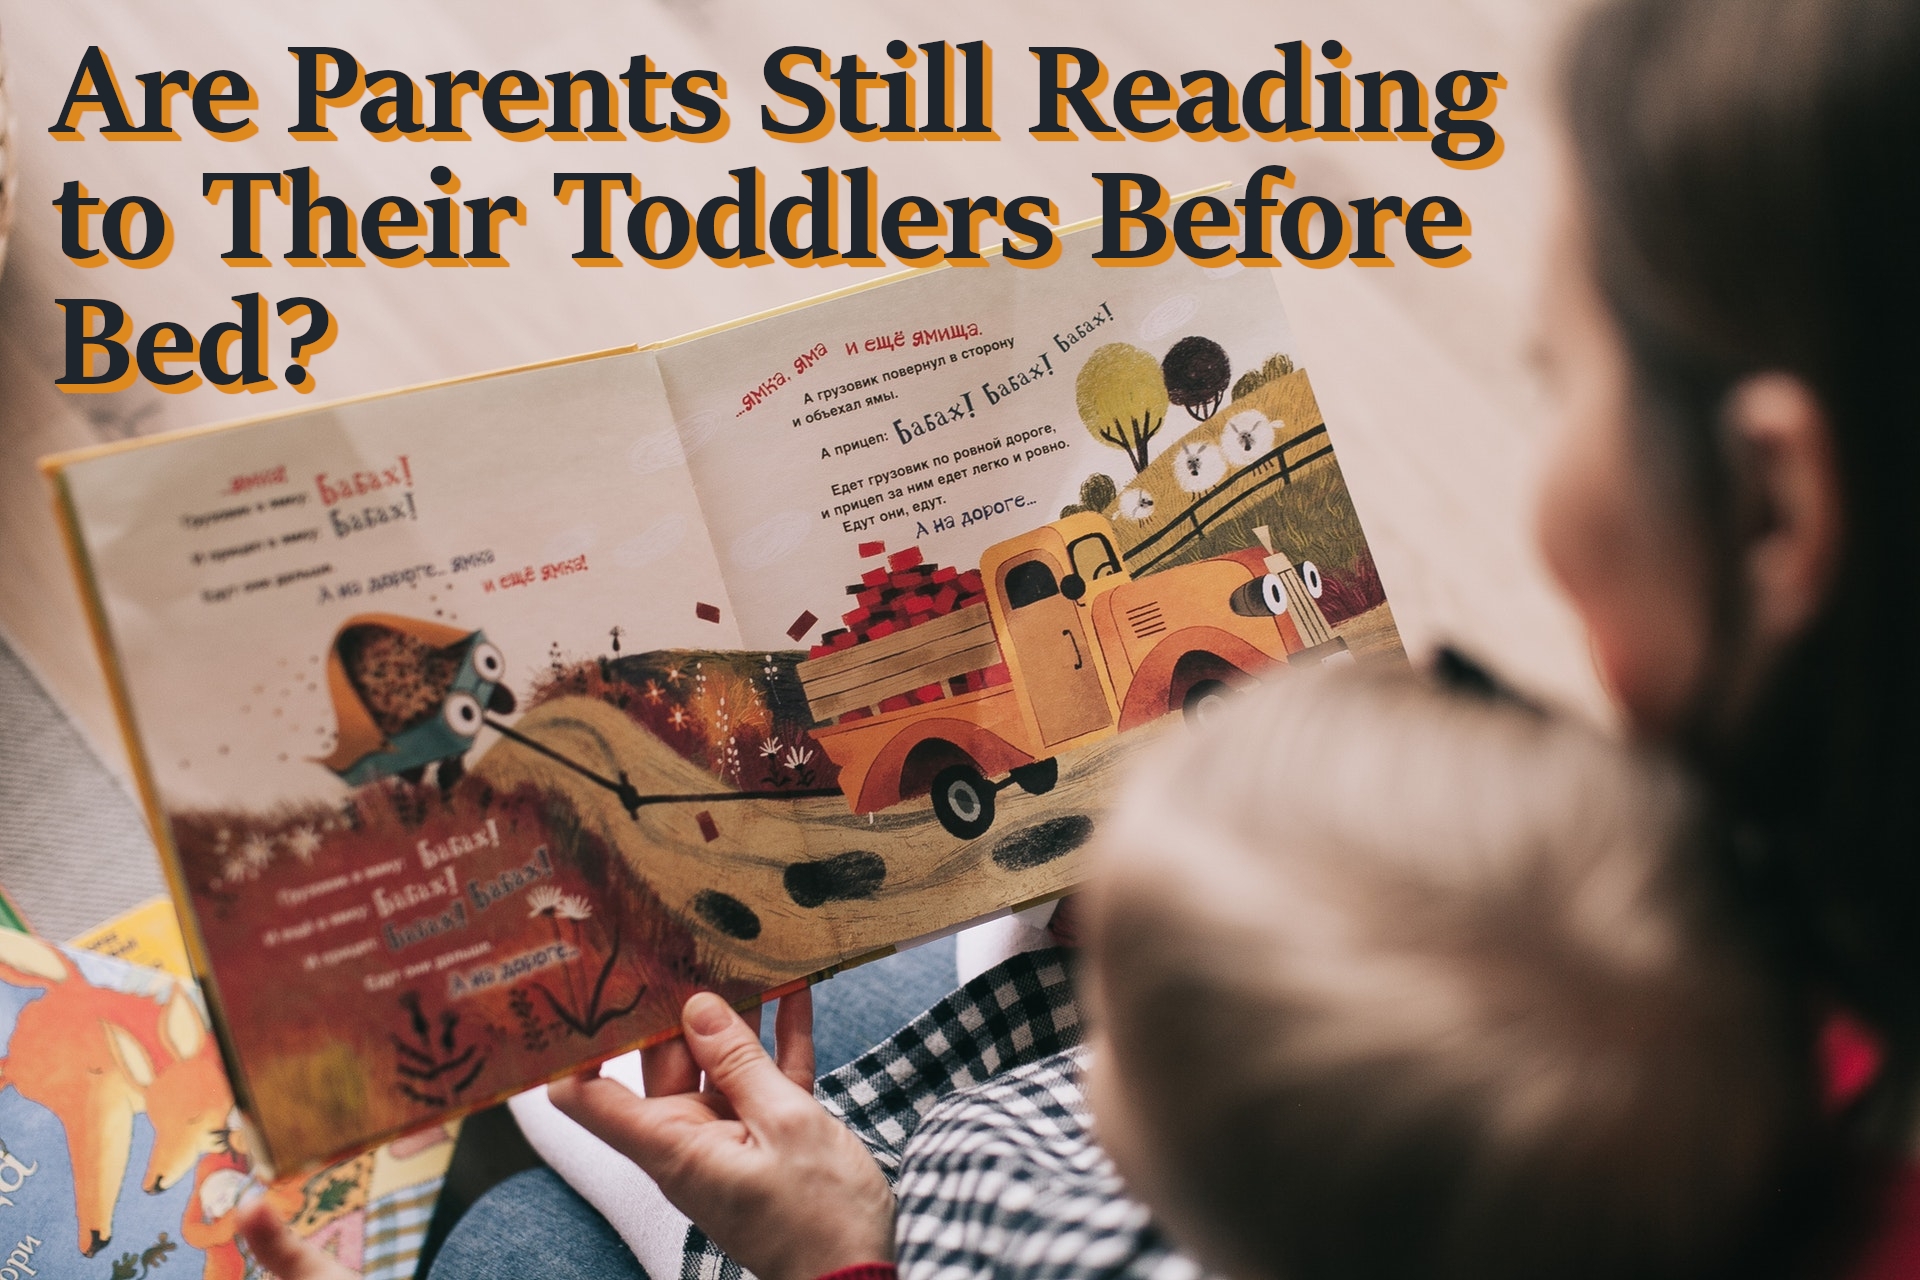 Are Parents Still Reading to Their Toddlers Before Bed?